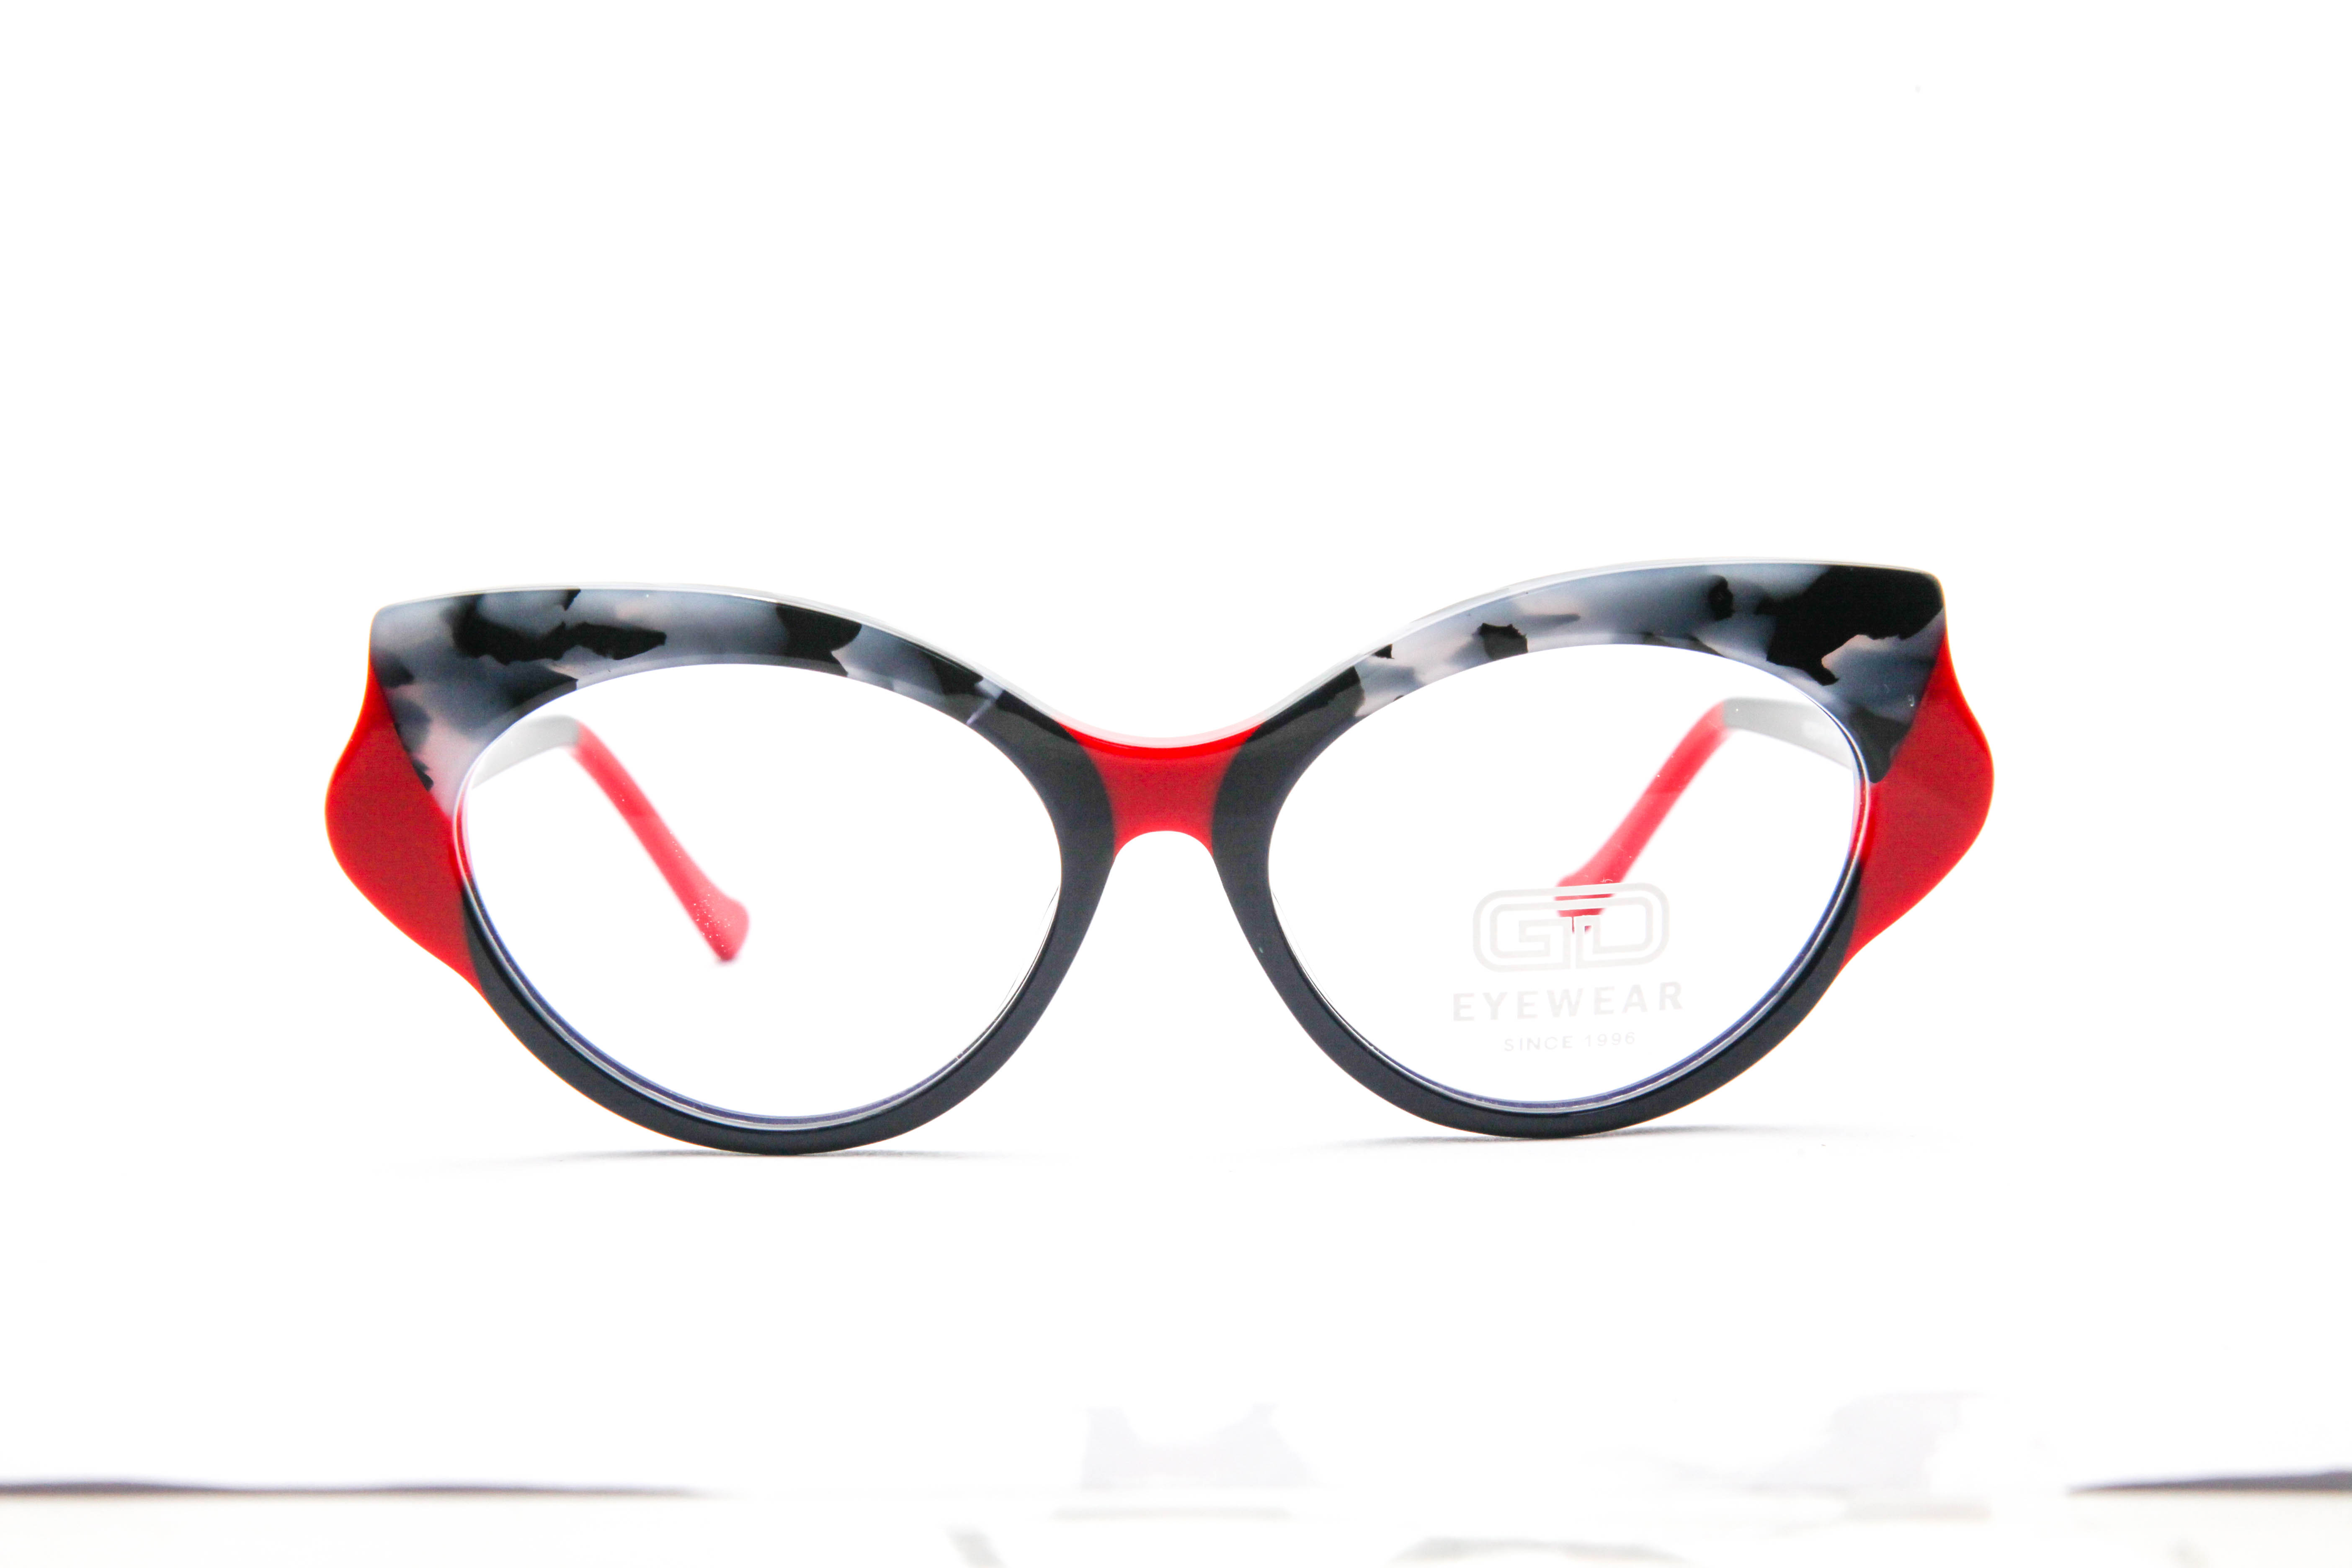 Gd 2023 New Arrival Italy Design Acetate Lamination Eyeglasses Frames Glasses Eyeglasses Frames Ready to Stock